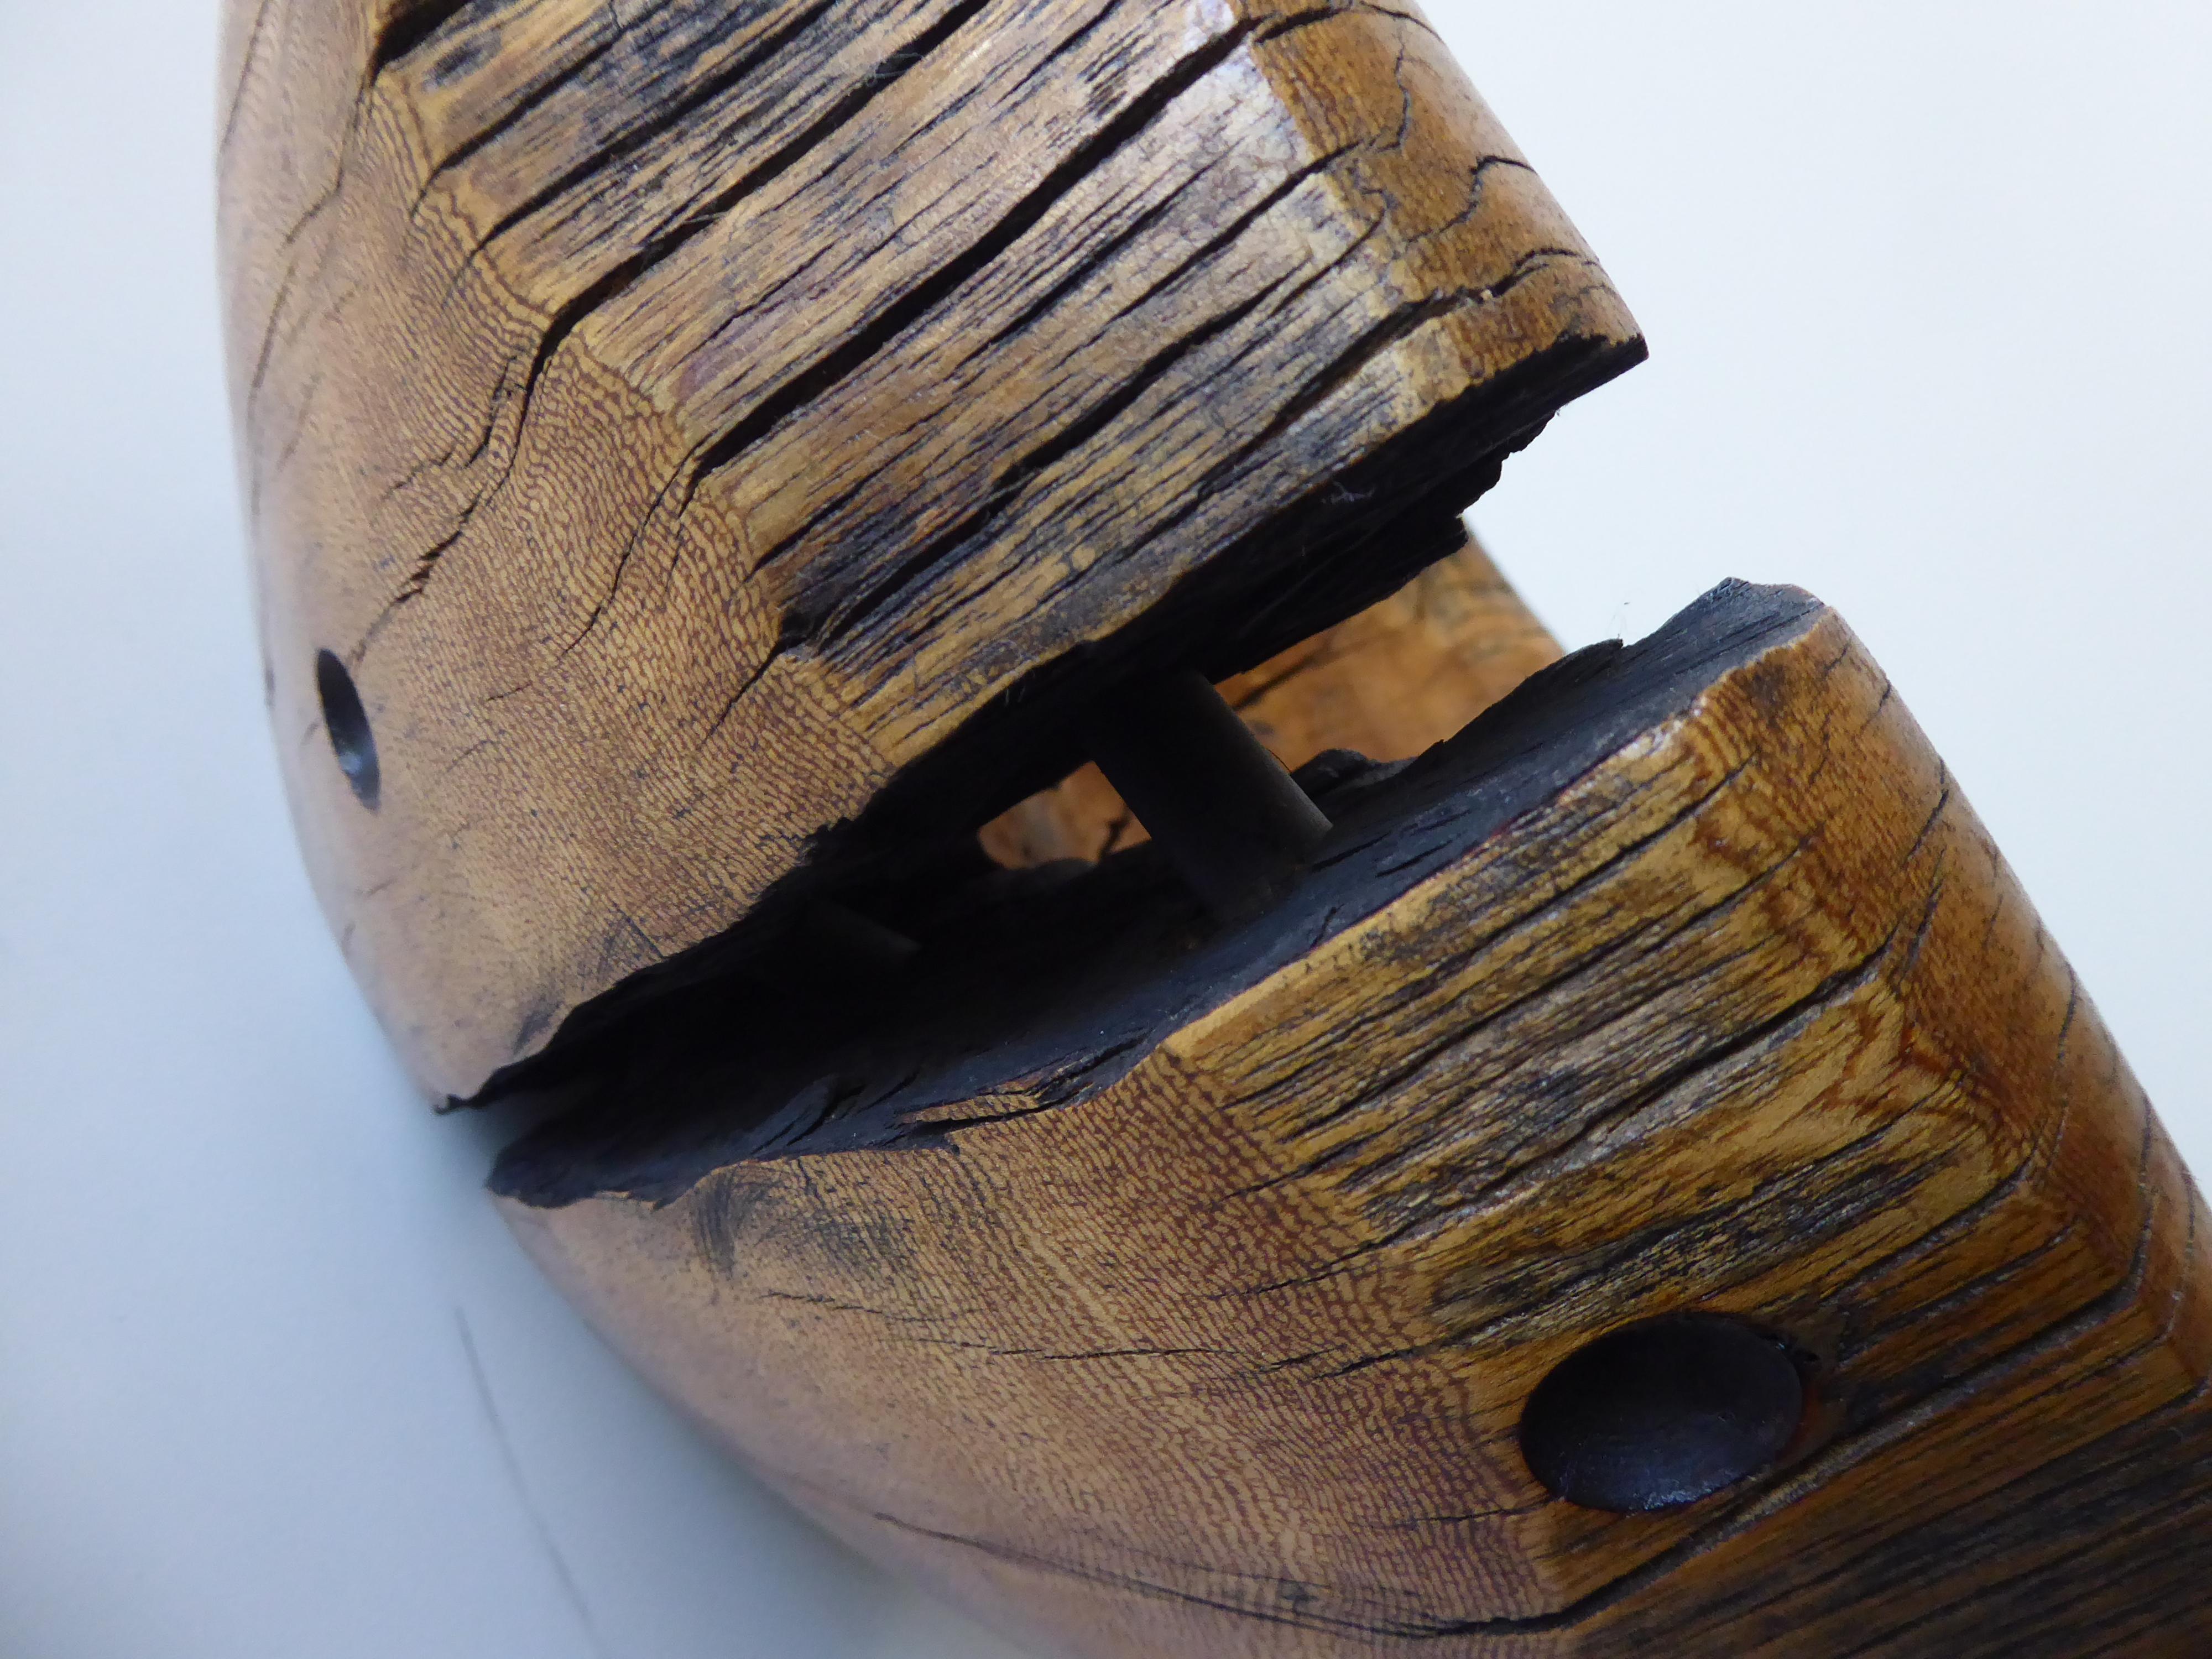 Organic Modern Solid Ficus Wood Sculpted Bowl by Contemporary Artist Daniel Pollock CA-4 Bowl For Sale